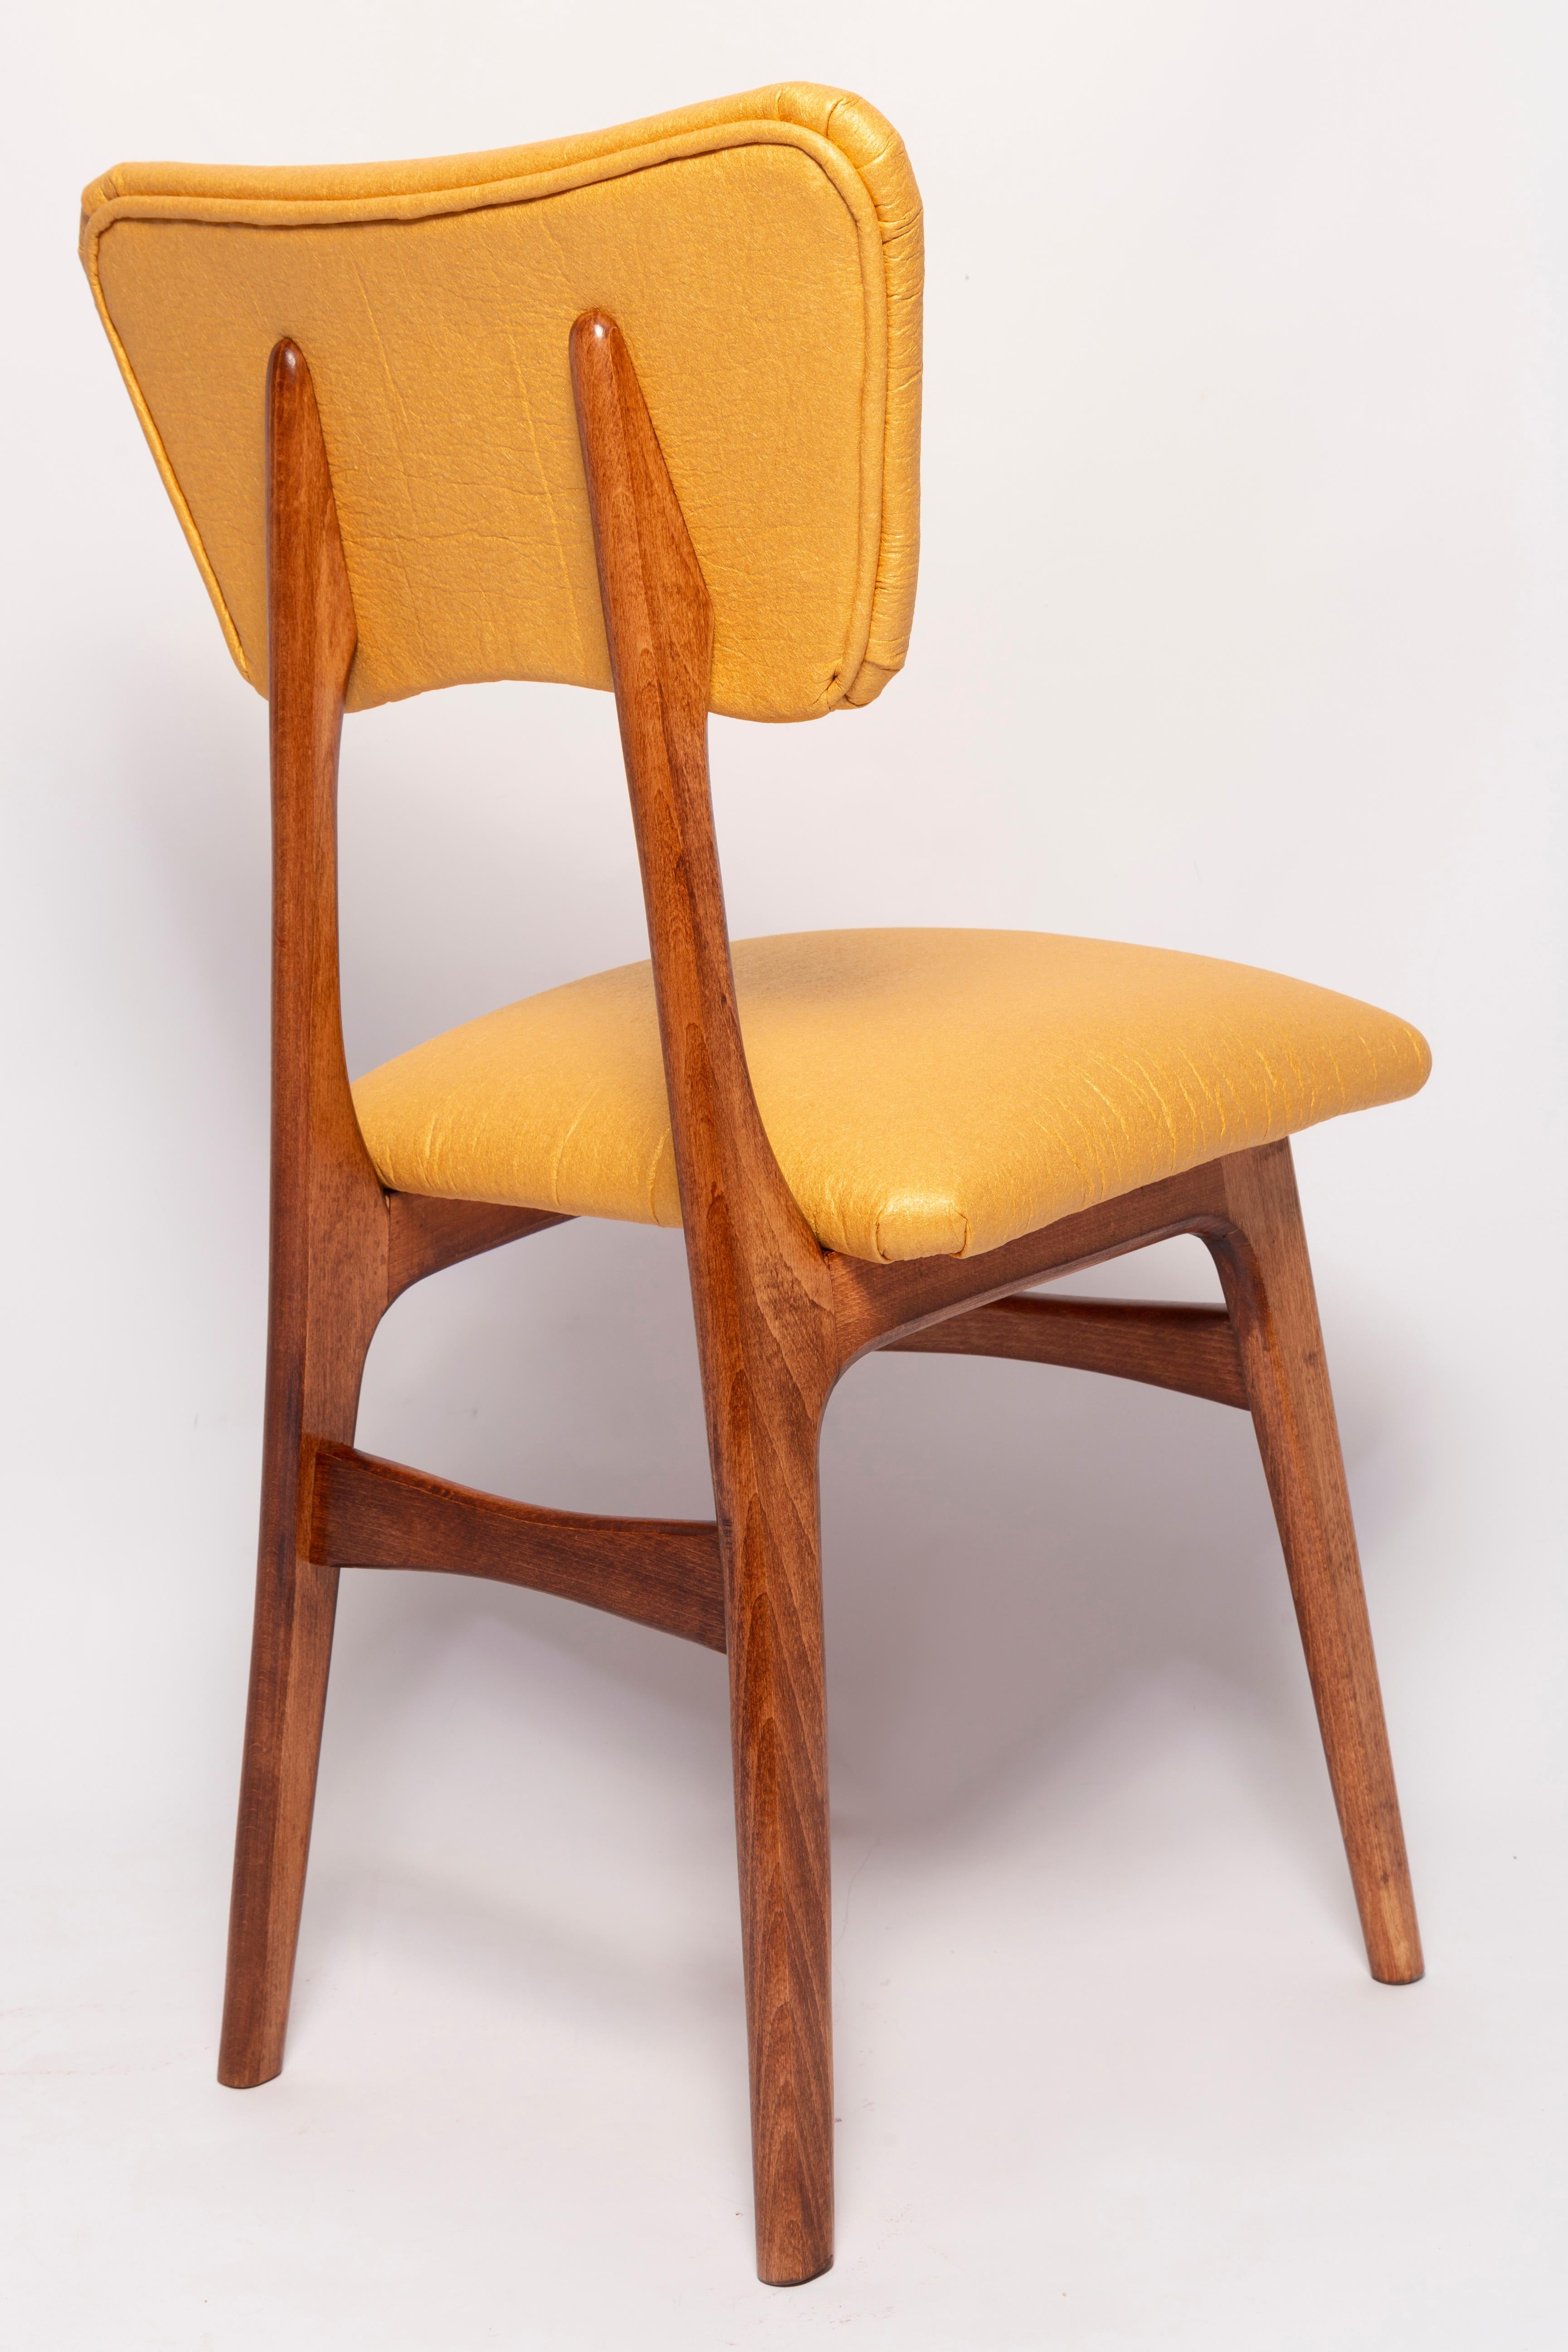 Set of Four Mid Century Butterfly Dining Chairs, Pineapple Leather, Europe 1960s For Sale 4